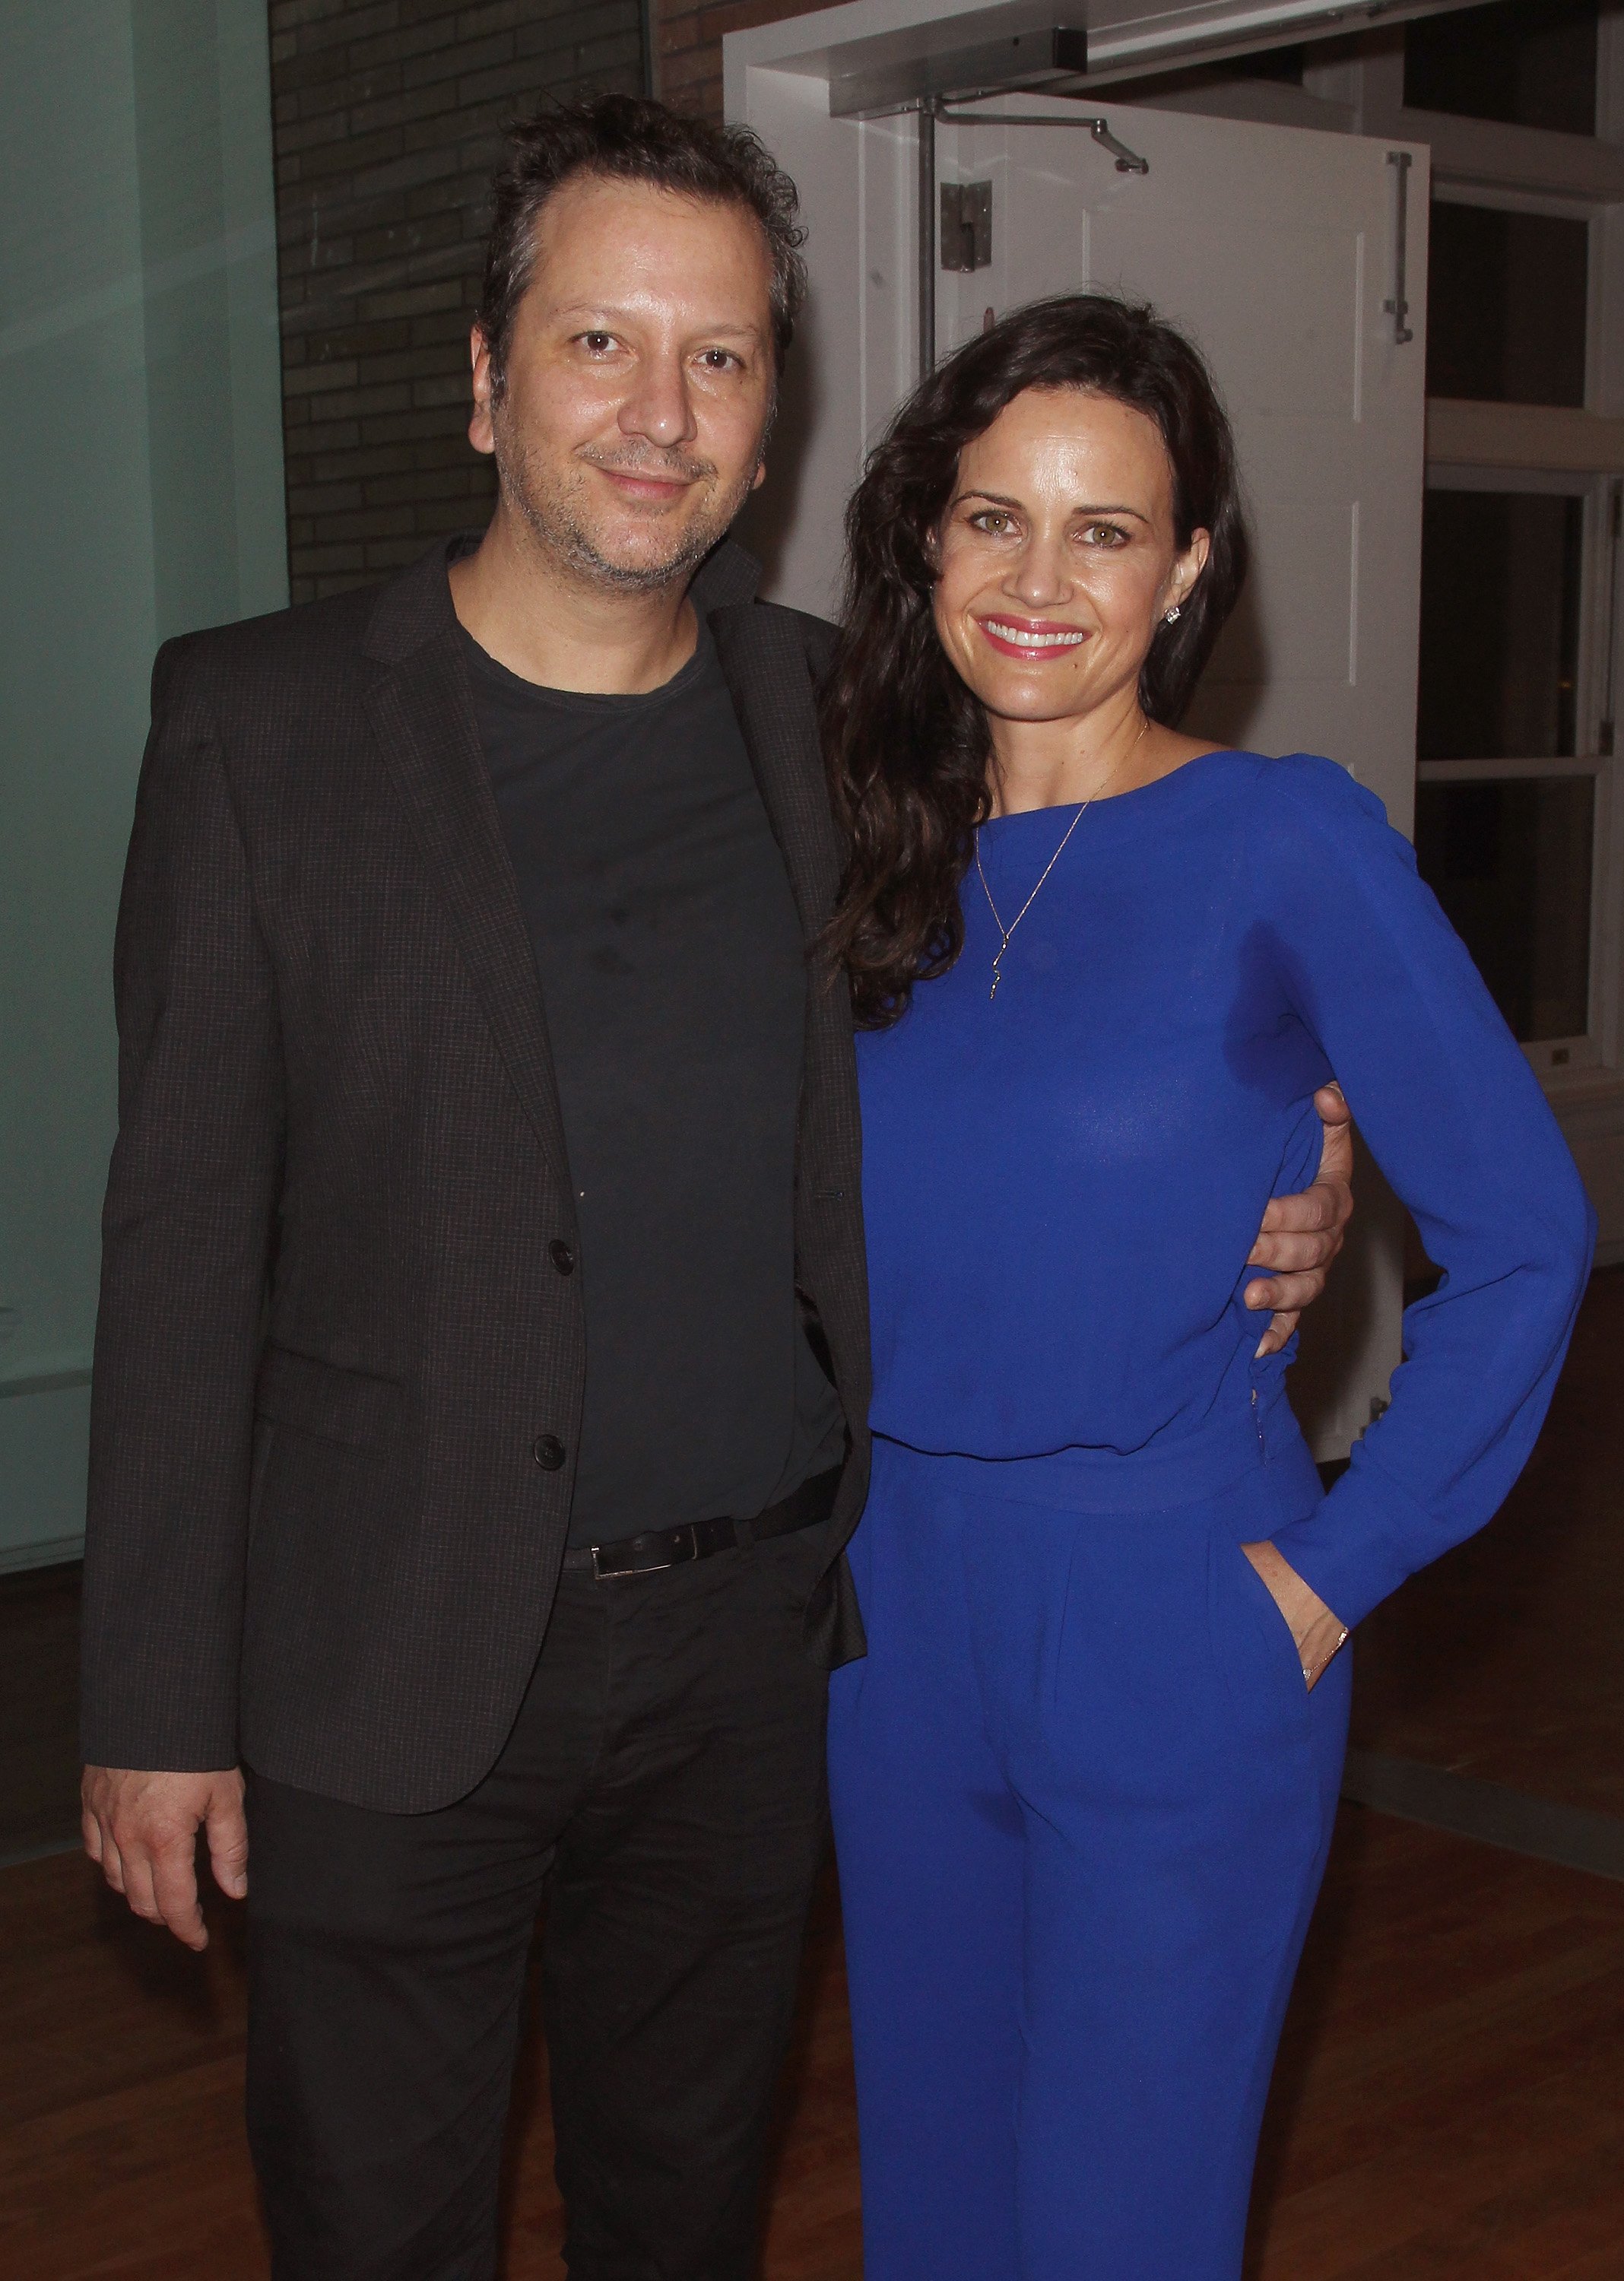 Sebastian Gutierrez and Carla Gugino at the after-party for Sony Pictures Classics' "Whiplash" at Carnegie Hall on September 29, 2014, in New York City. | Source: Getty Images